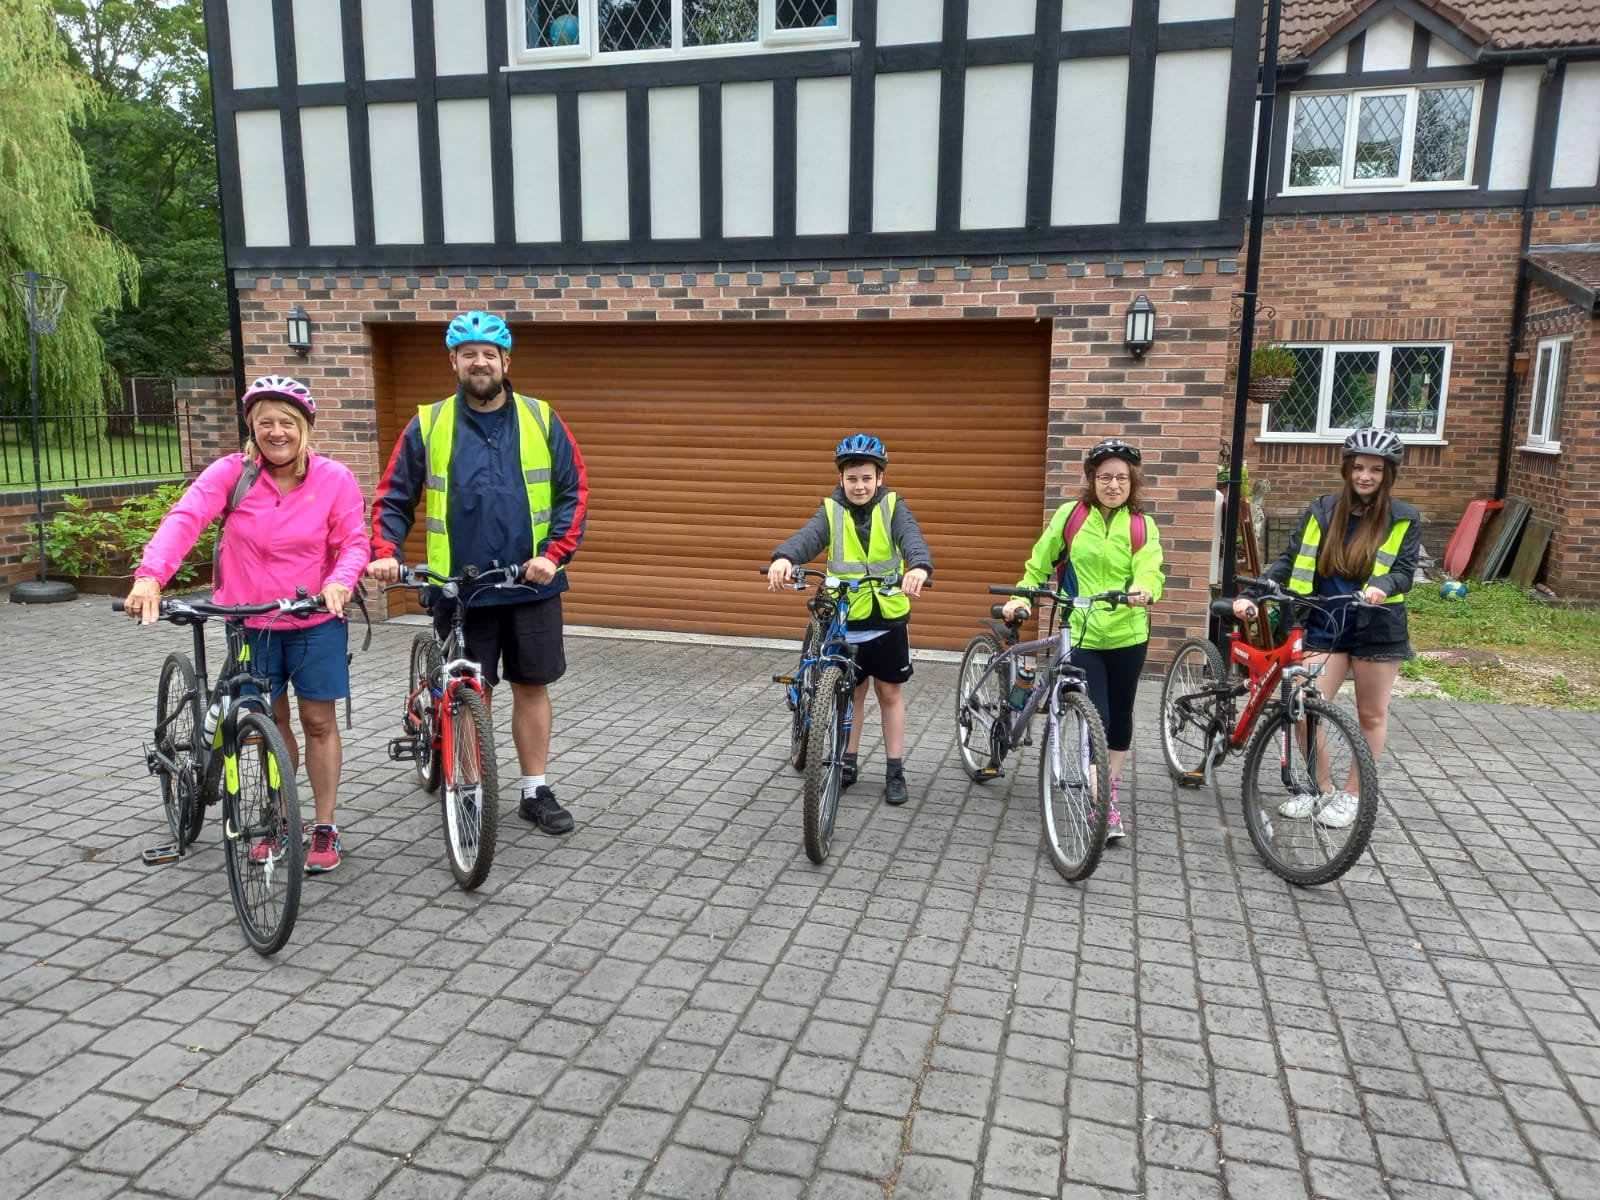 Bikeability instructor Gill with four trainee cyclists